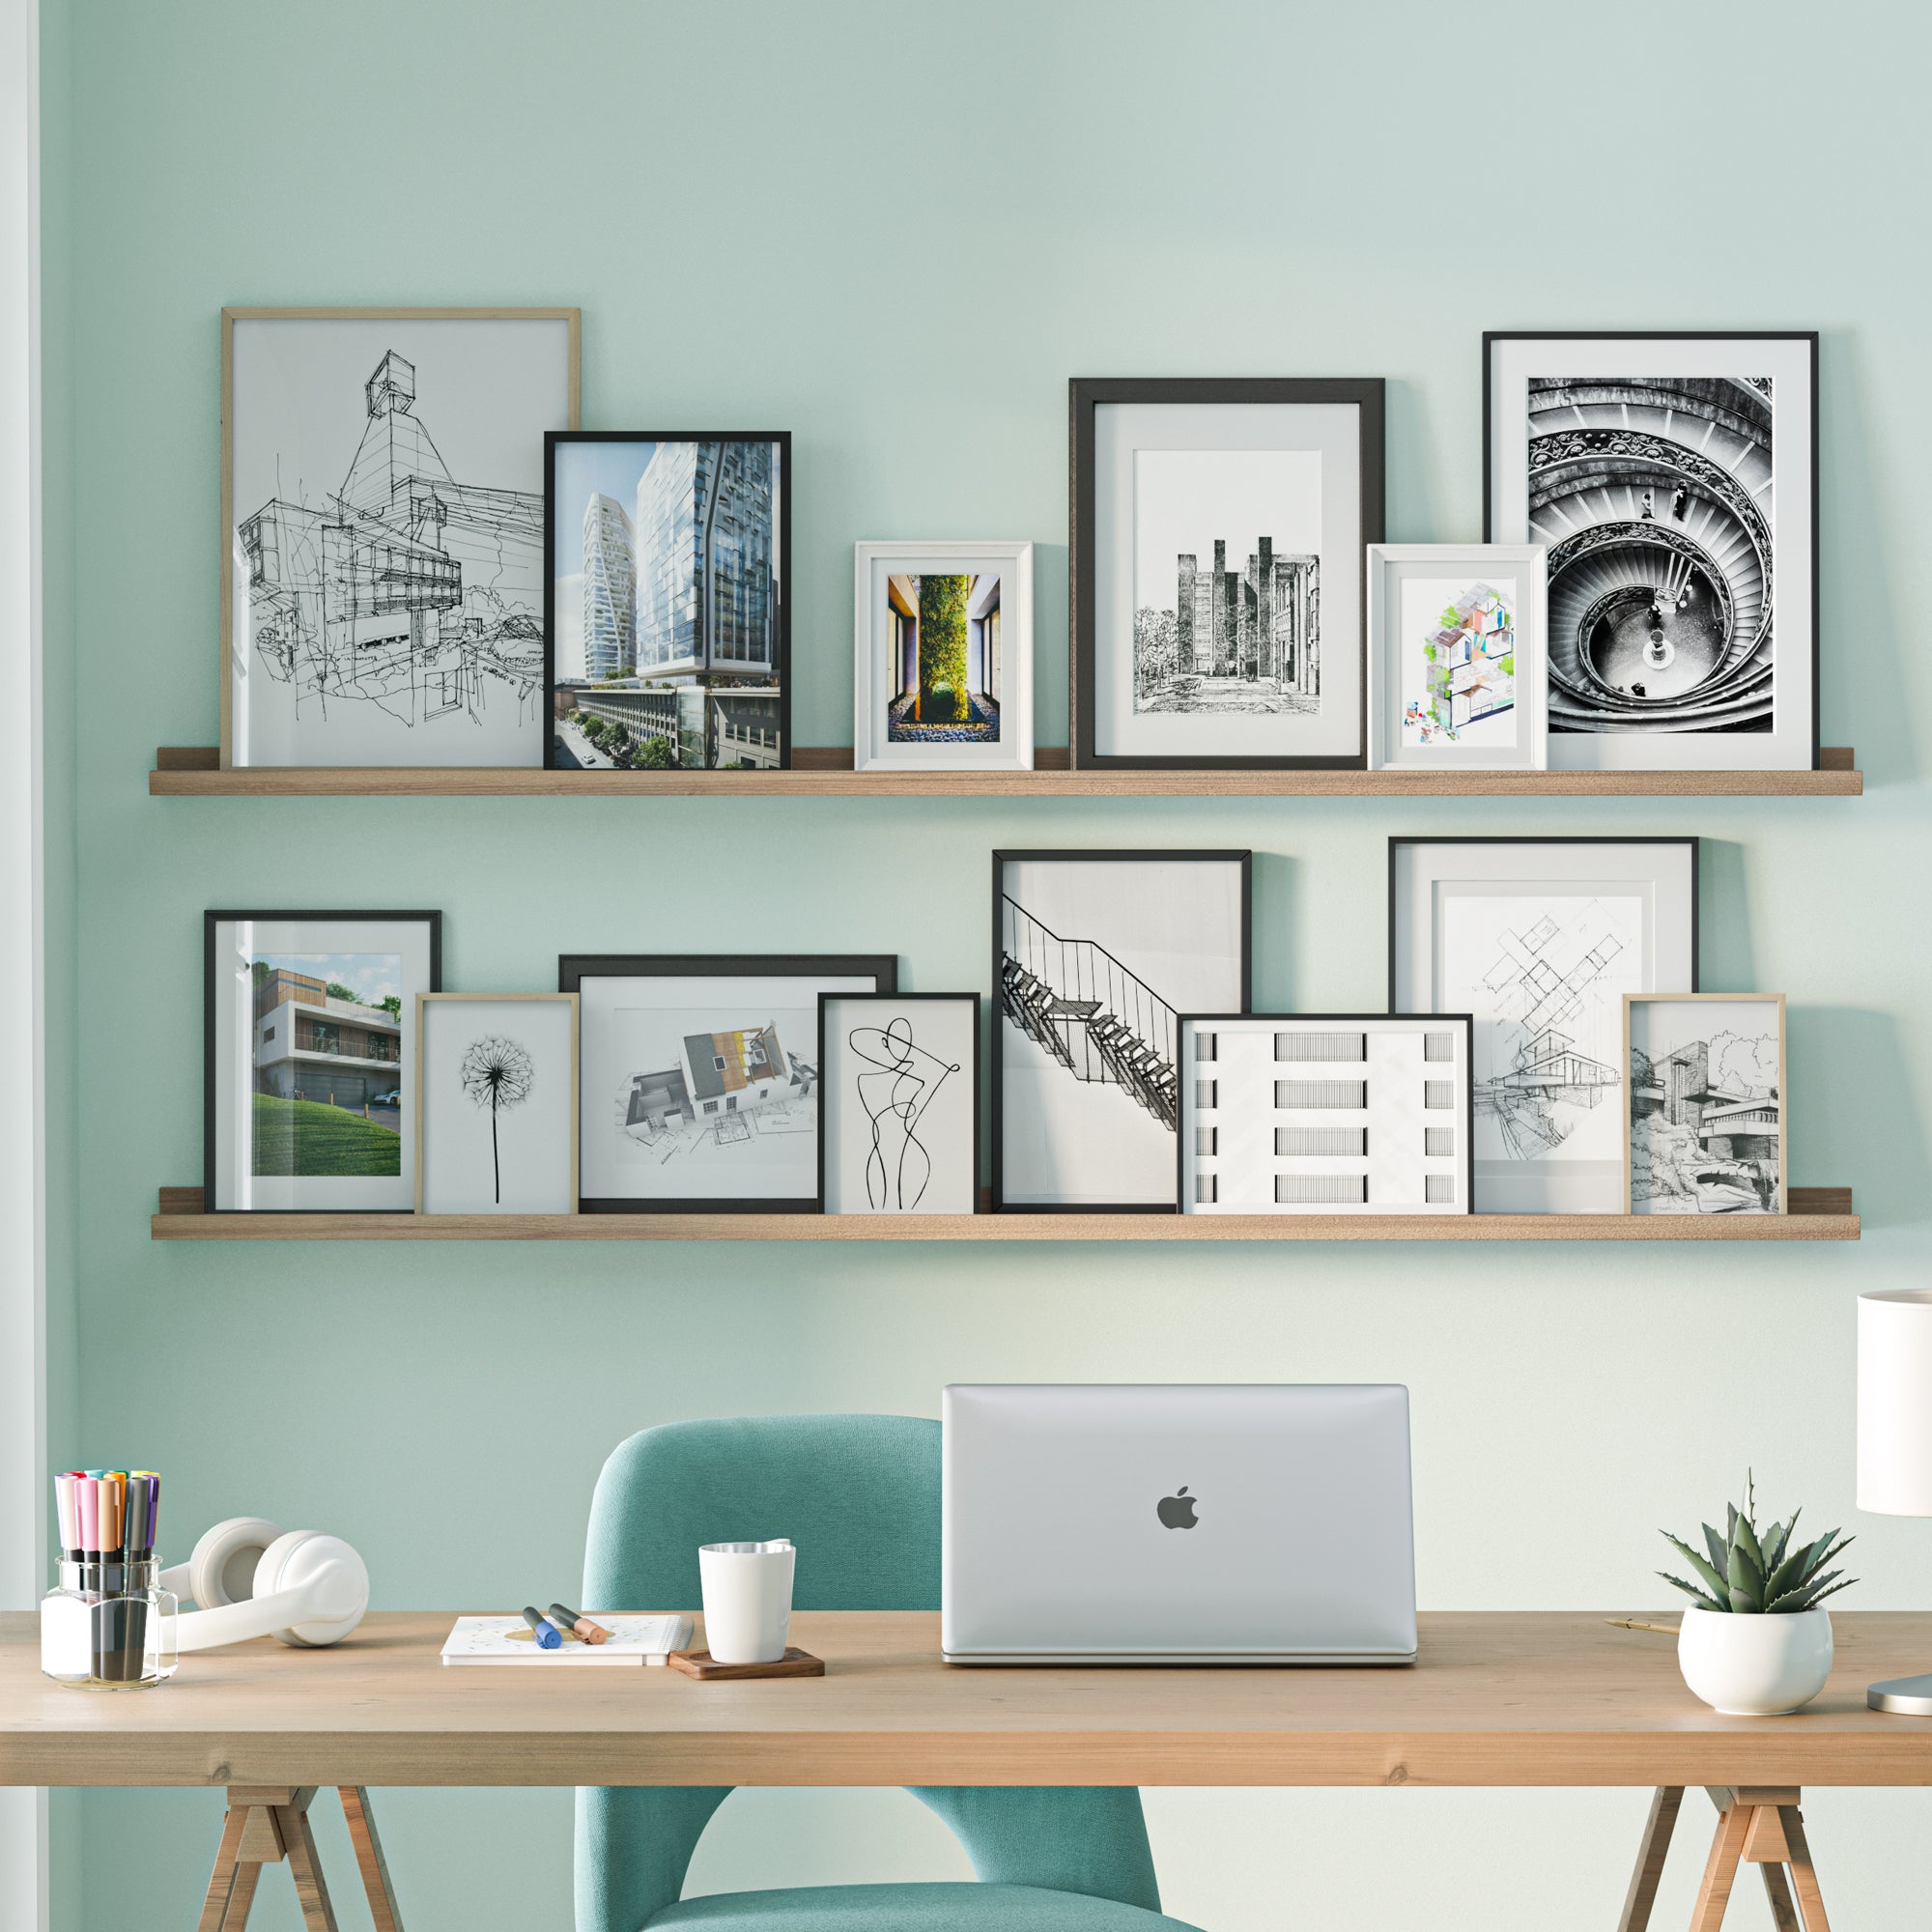 A workspace with a laptop on a wooden desk, a teal chair, and shelves for wall storage above holding various framed architectural drawings and photographs.